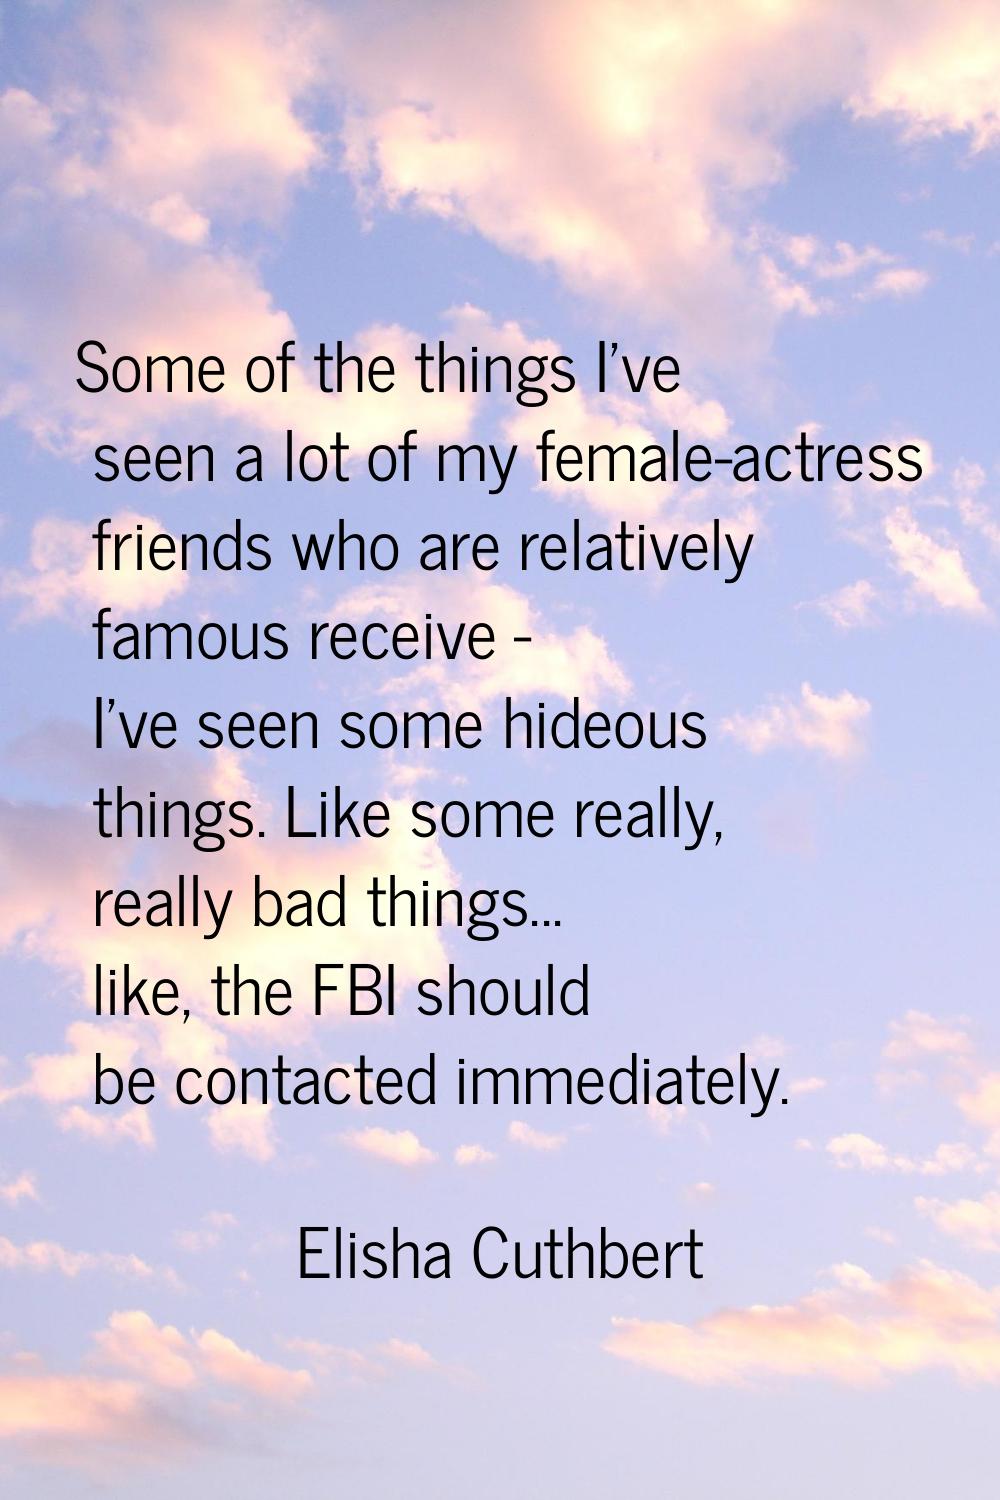 Some of the things I've seen a lot of my female-actress friends who are relatively famous receive -